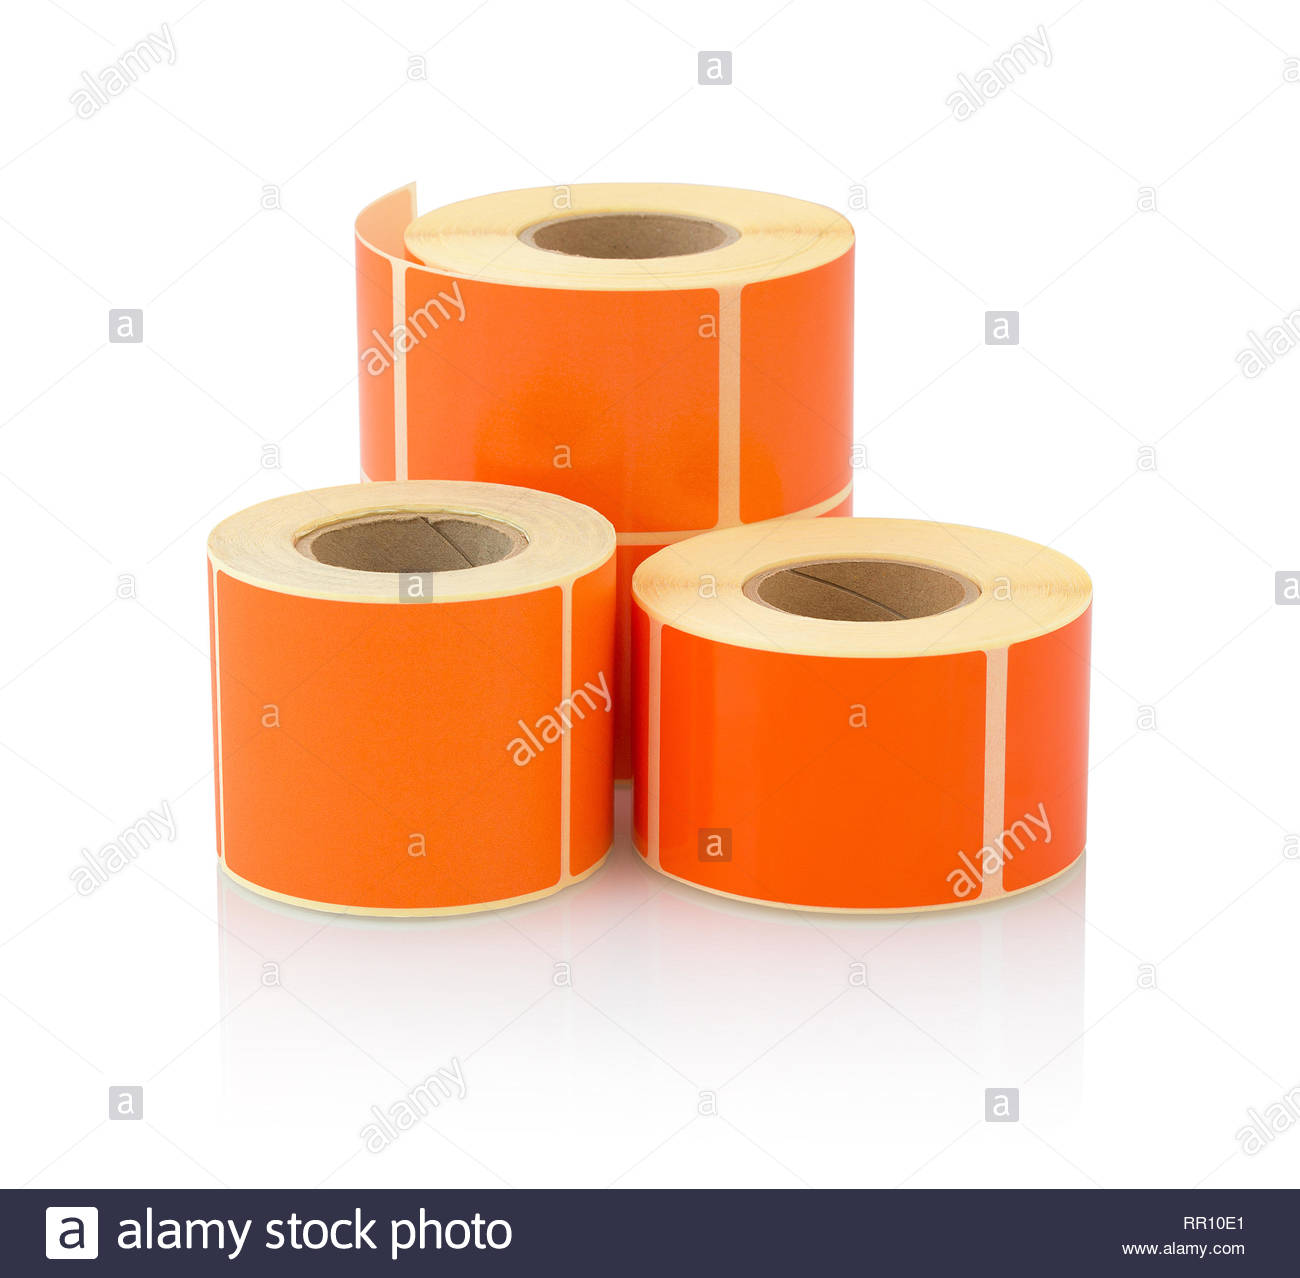 Orange Label Roll Isolated On White Background With Shadow